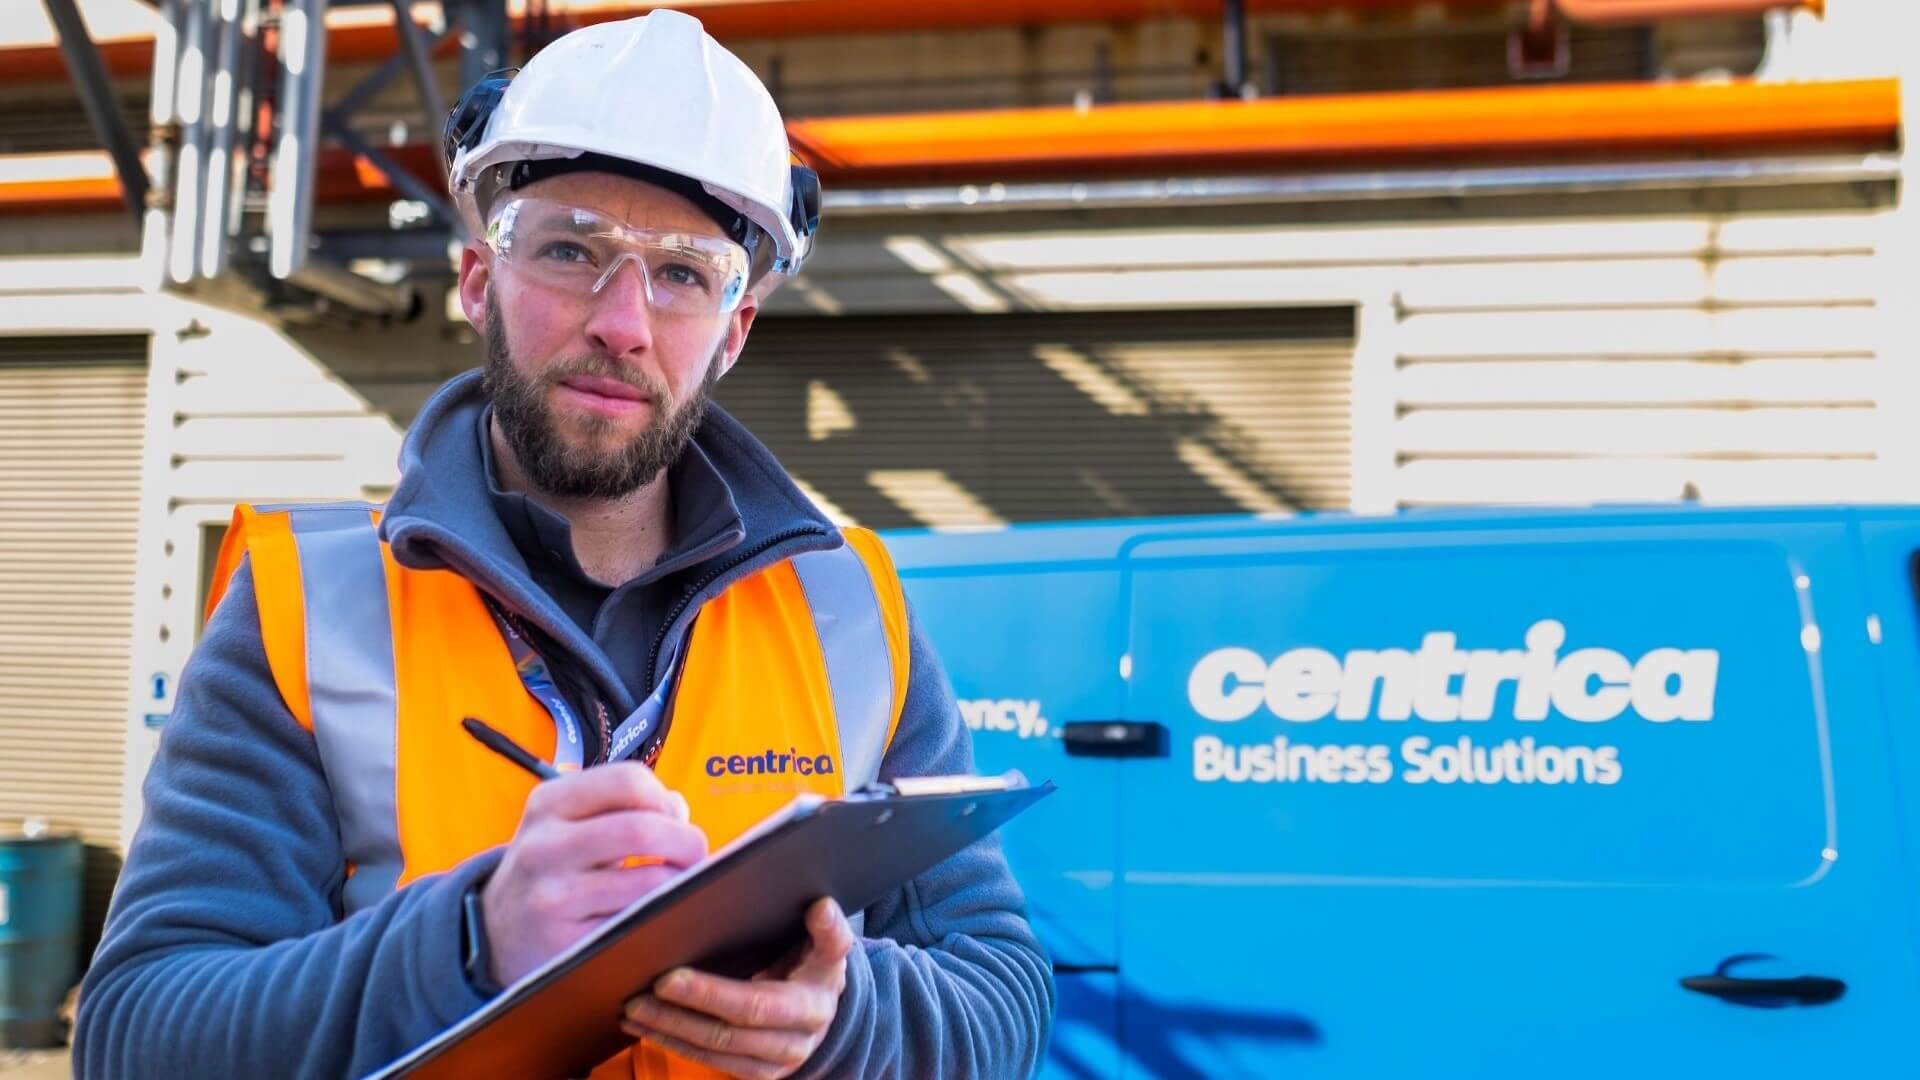 Centrica engineer with hard hat and clipboard